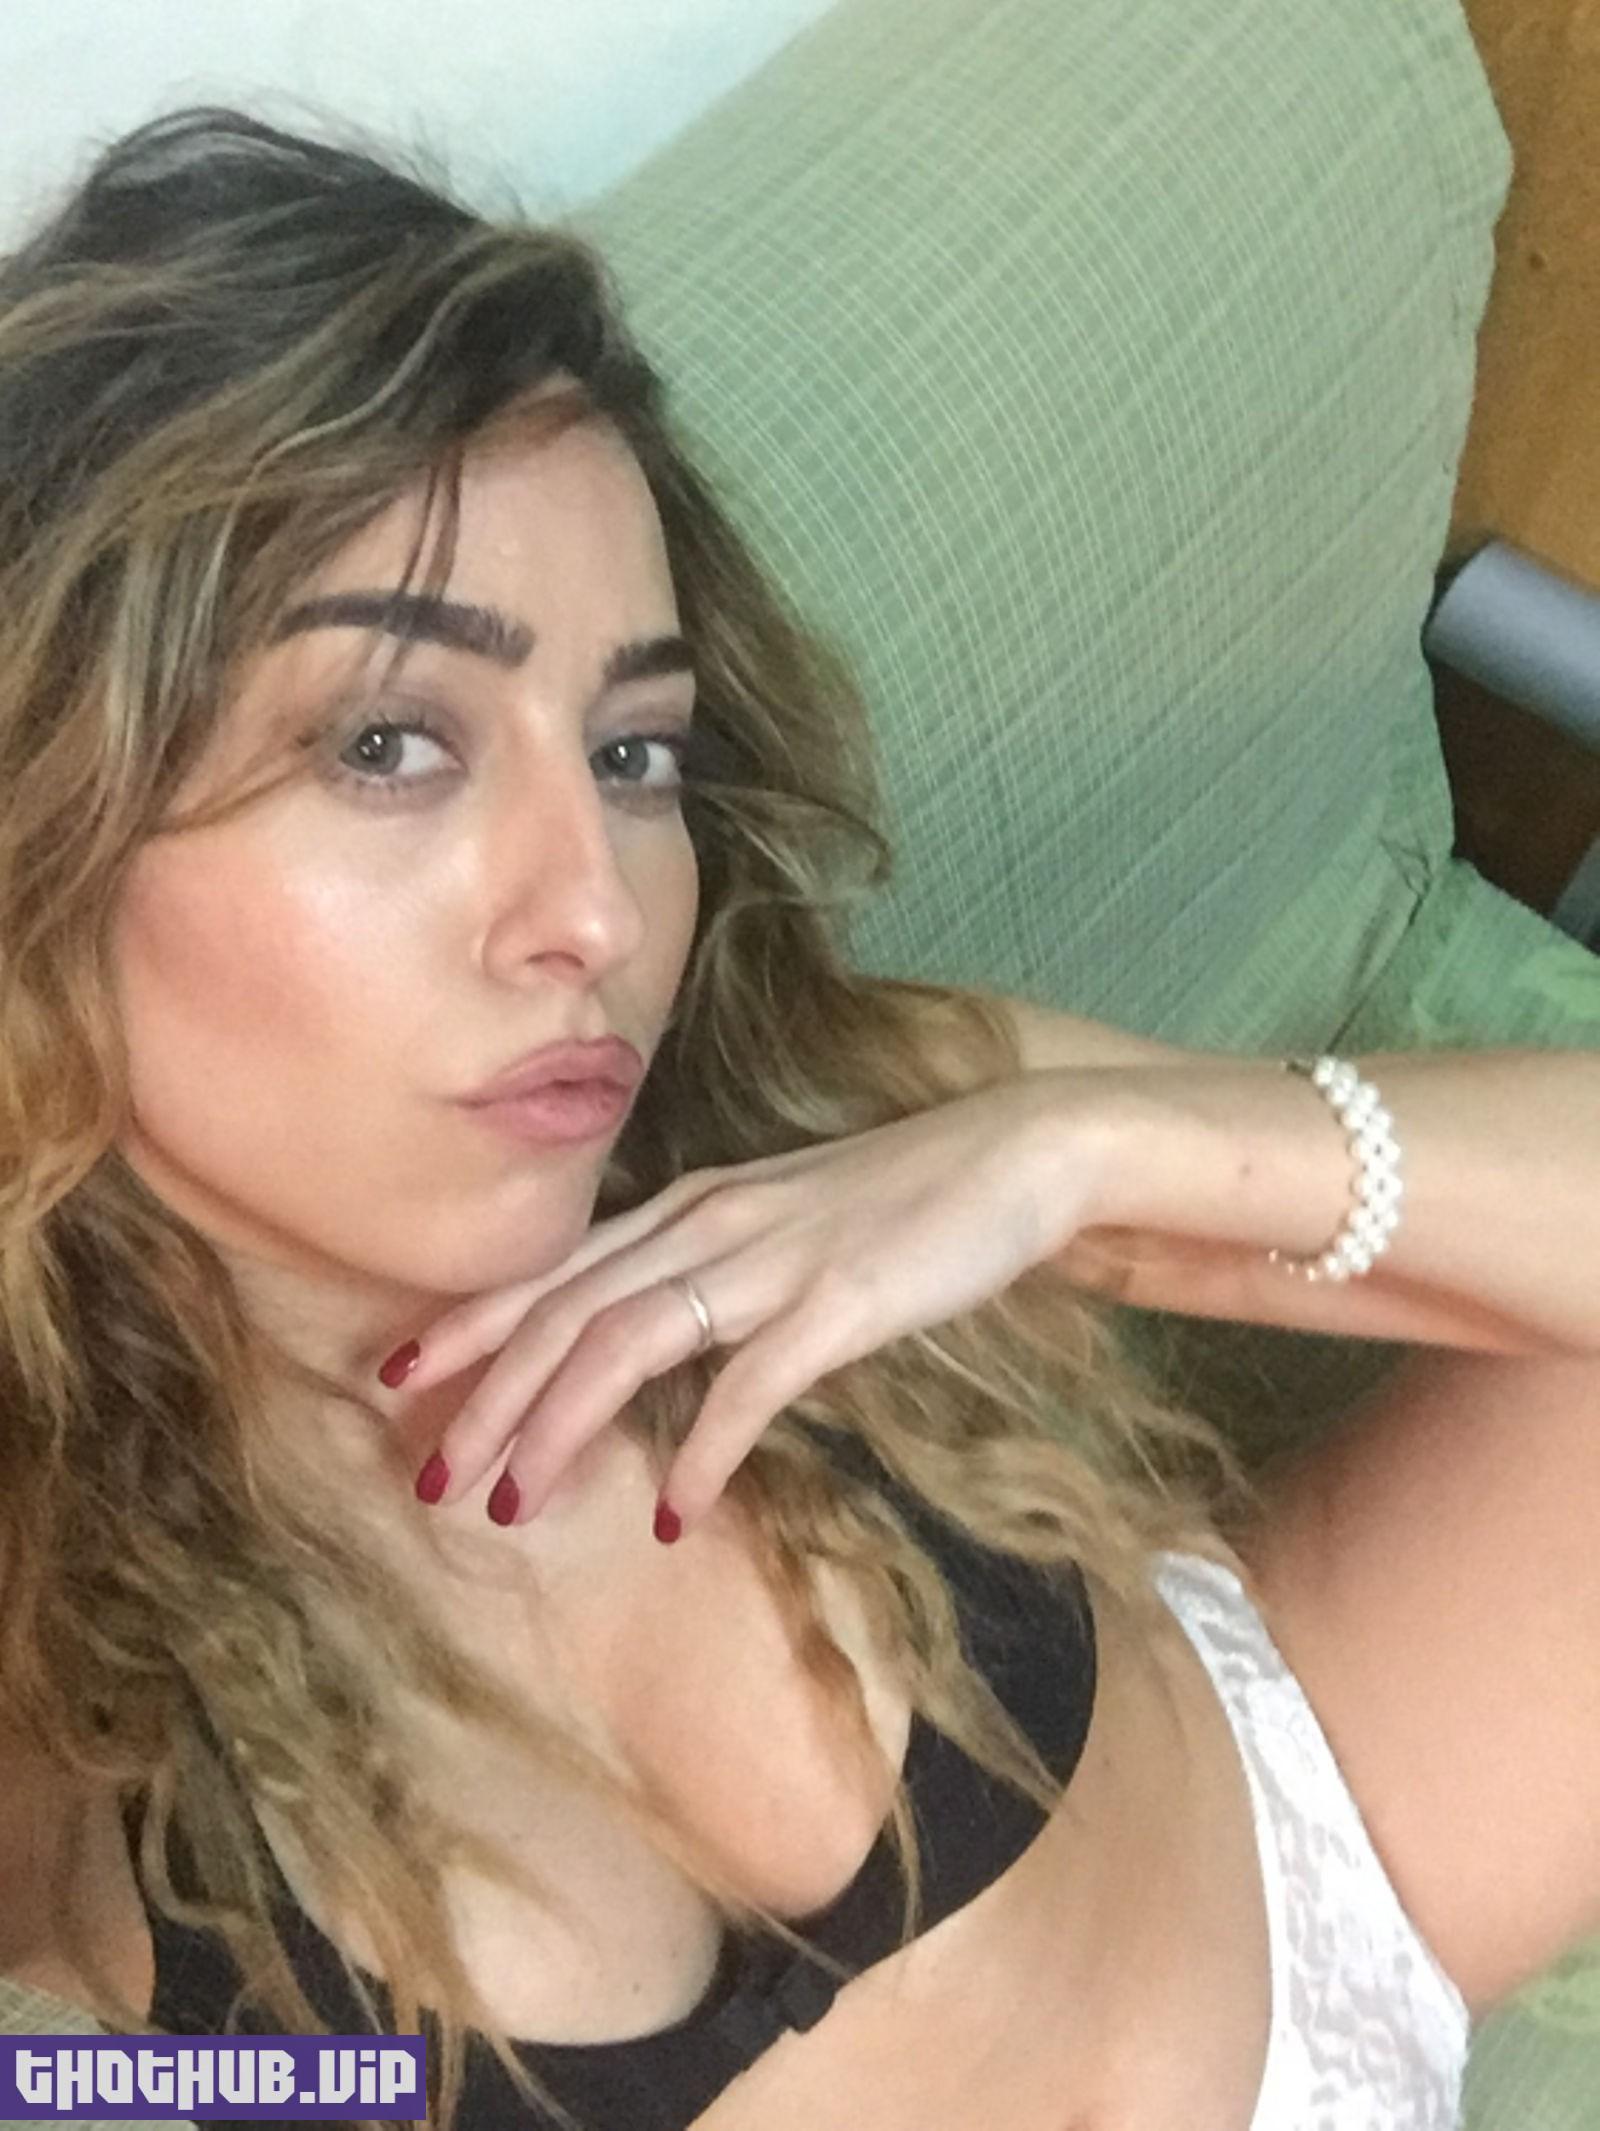 Paola Saulino Nude Photos and Blowjob Video Leaked The Fappening 2018